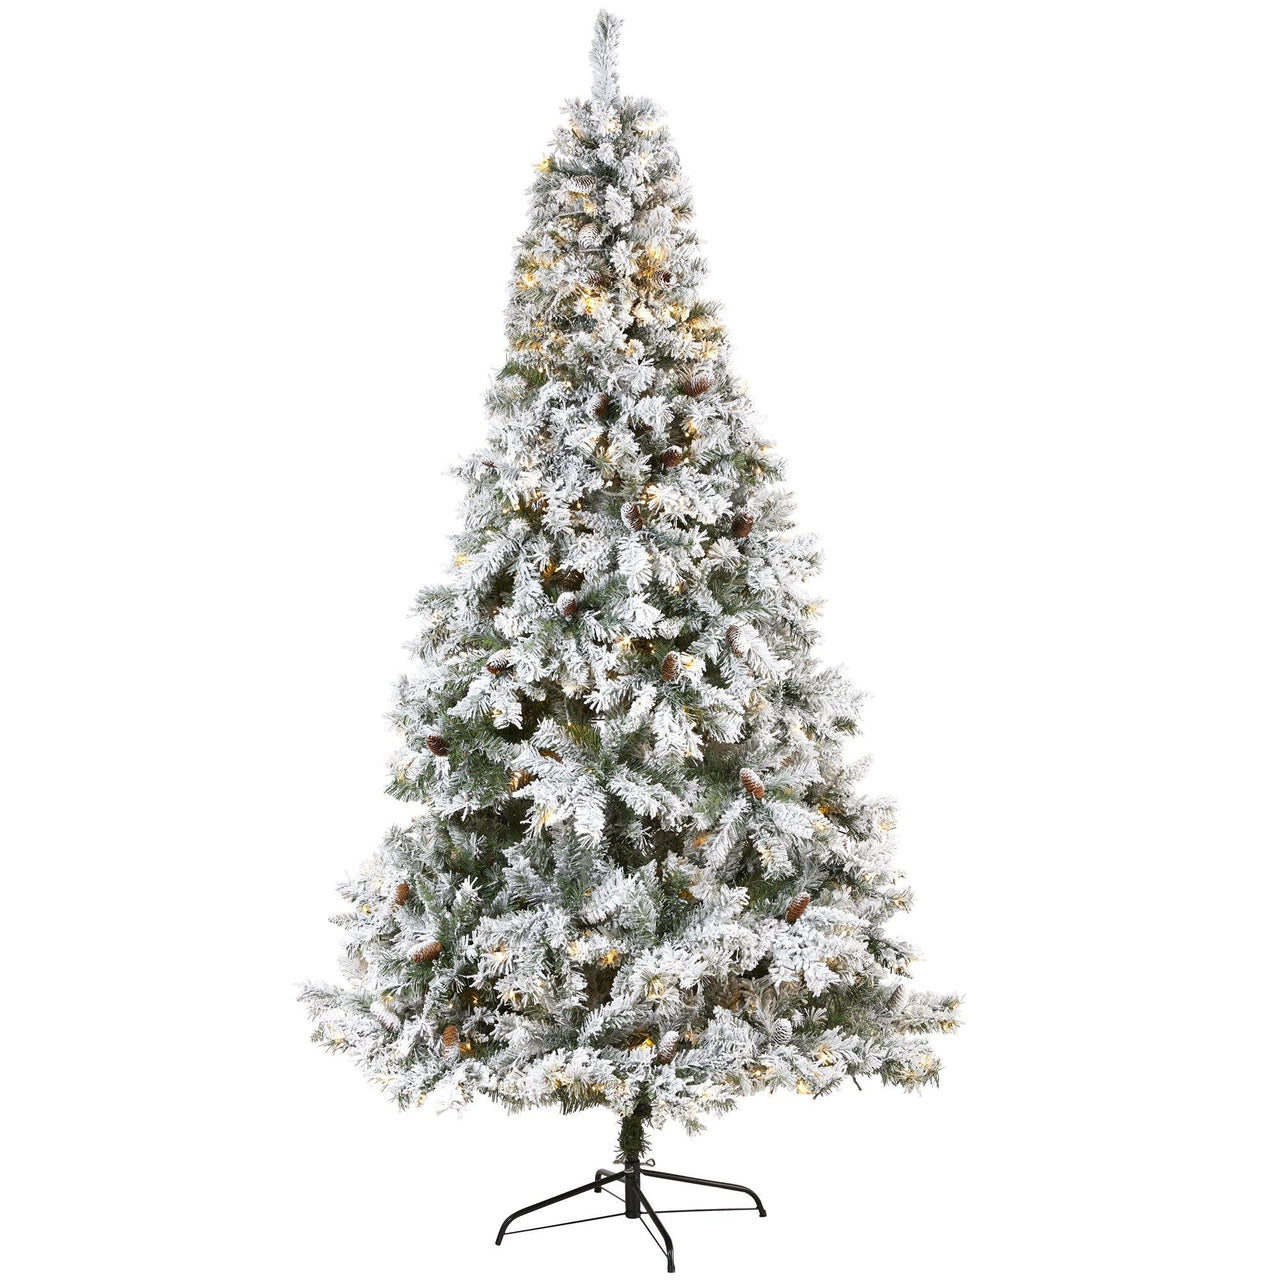 8' Flocked White River Mountain Pine Artificial Christmas Tree with Pinecones and 500 Clear LED Lights